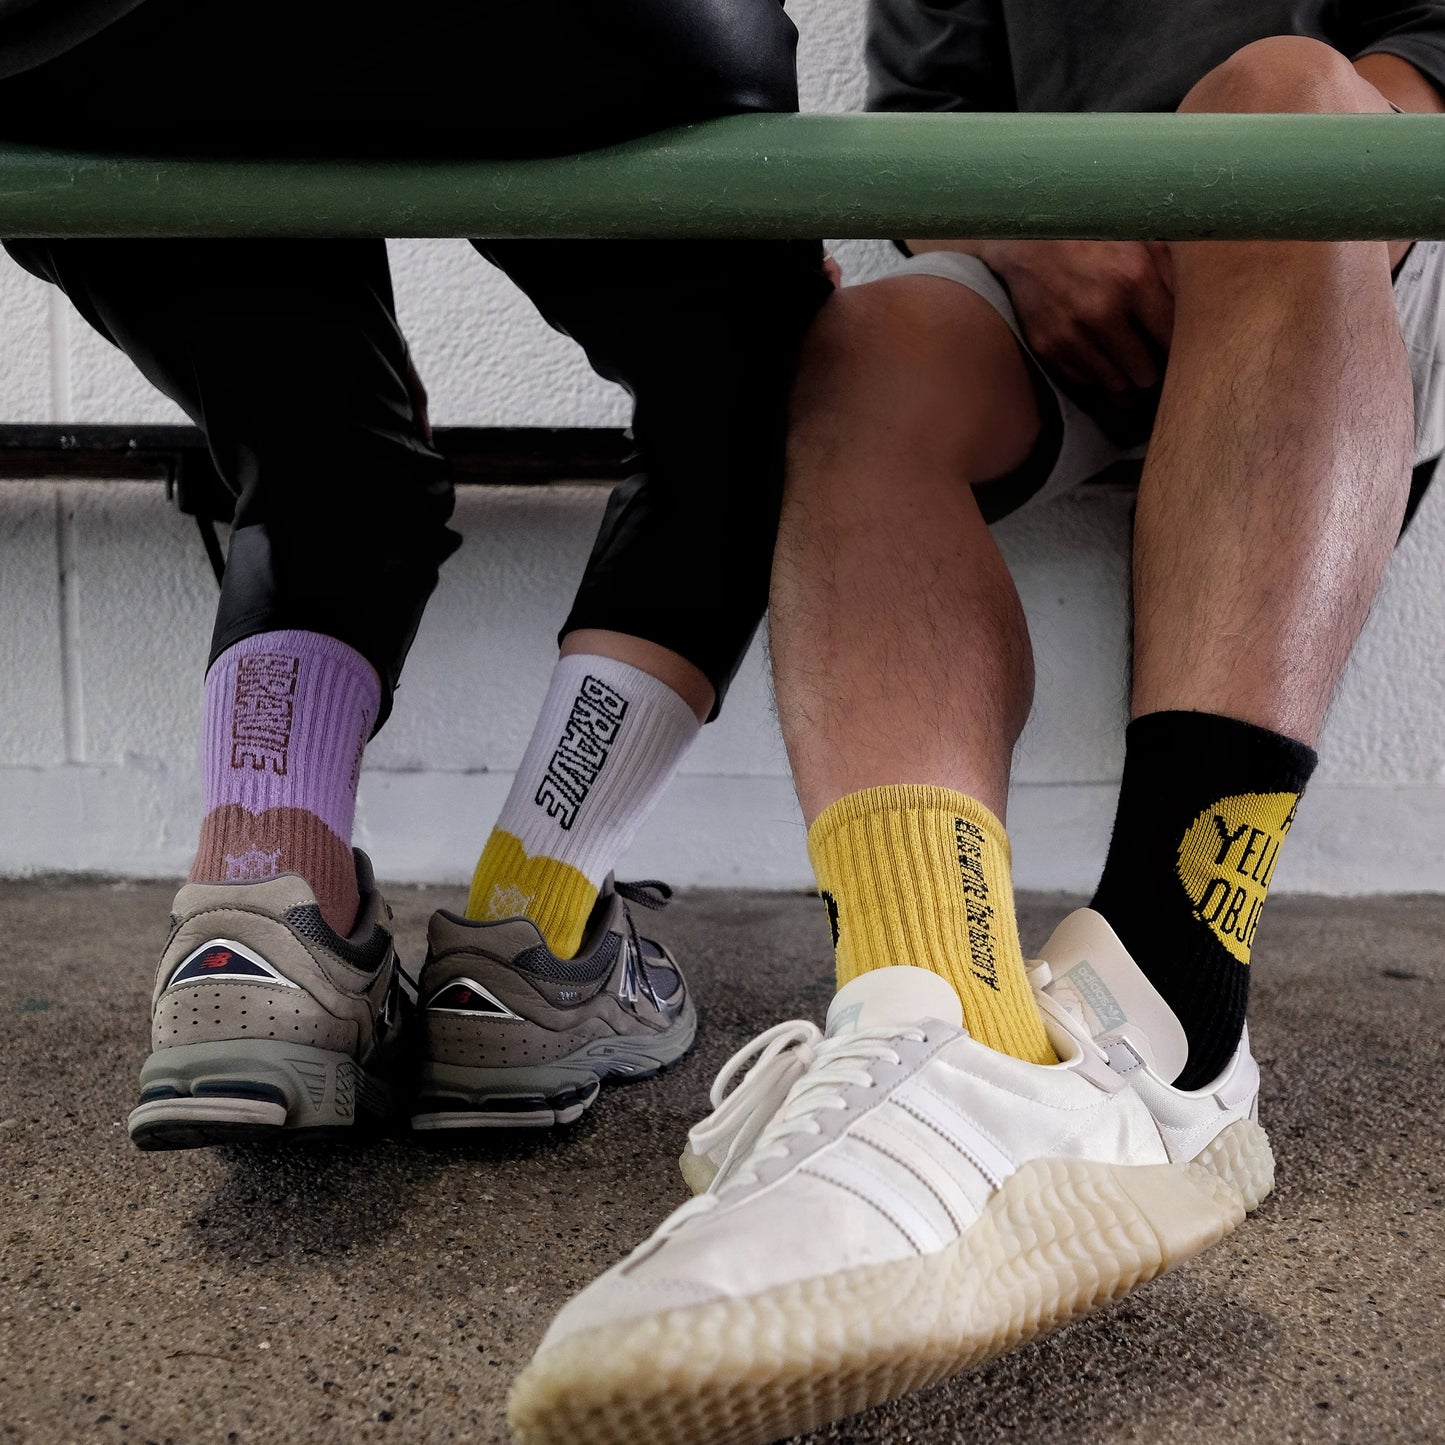 A.Y.O. Socks Pack (4 Pairs) - a yellow object